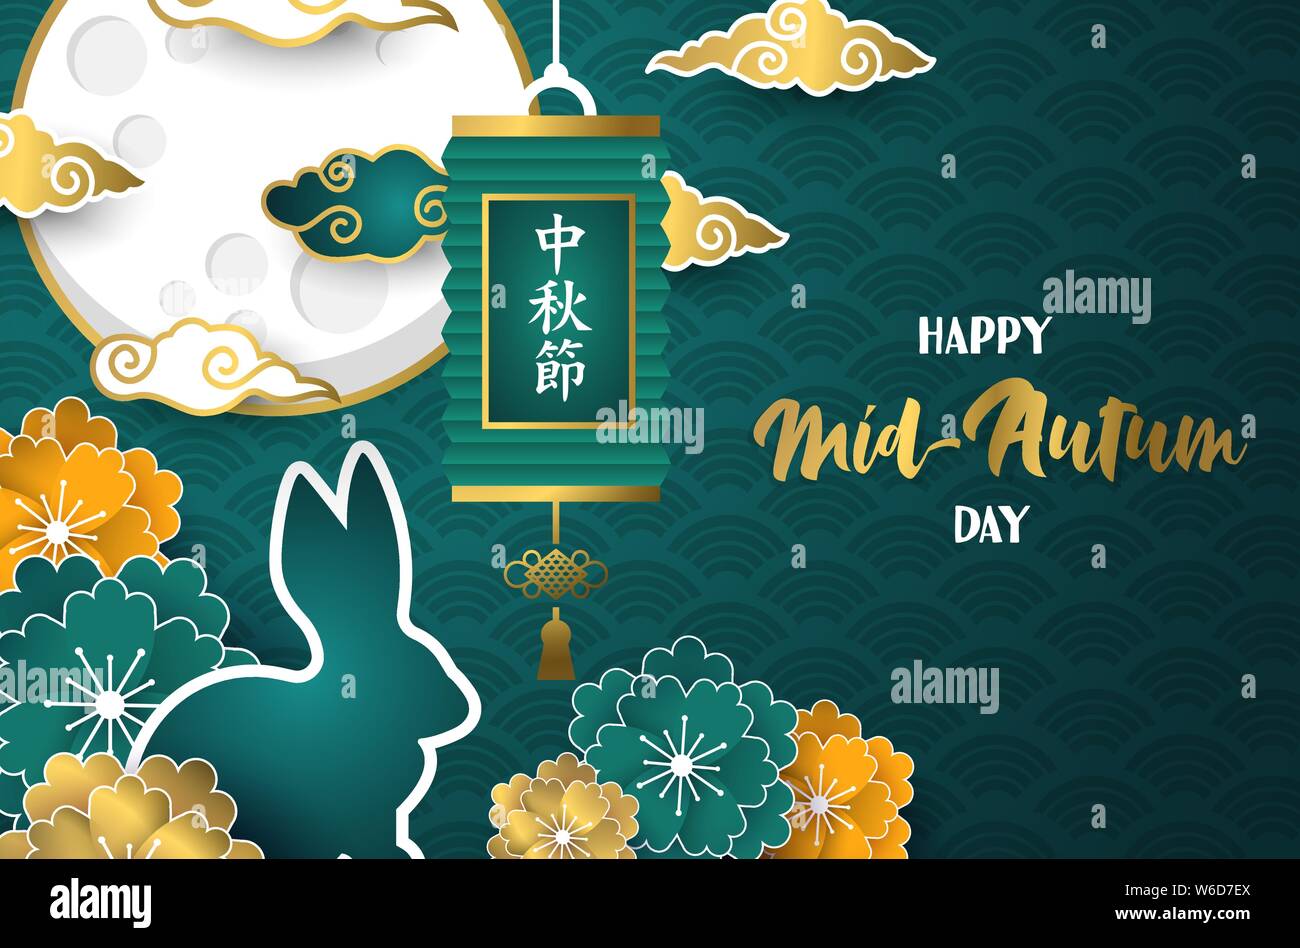 Happy mid autumn festival greeting card illustration of cute paper cut flowers and Asian clouds with rabbit under full moon. Traditional Chinese holid Stock Vector